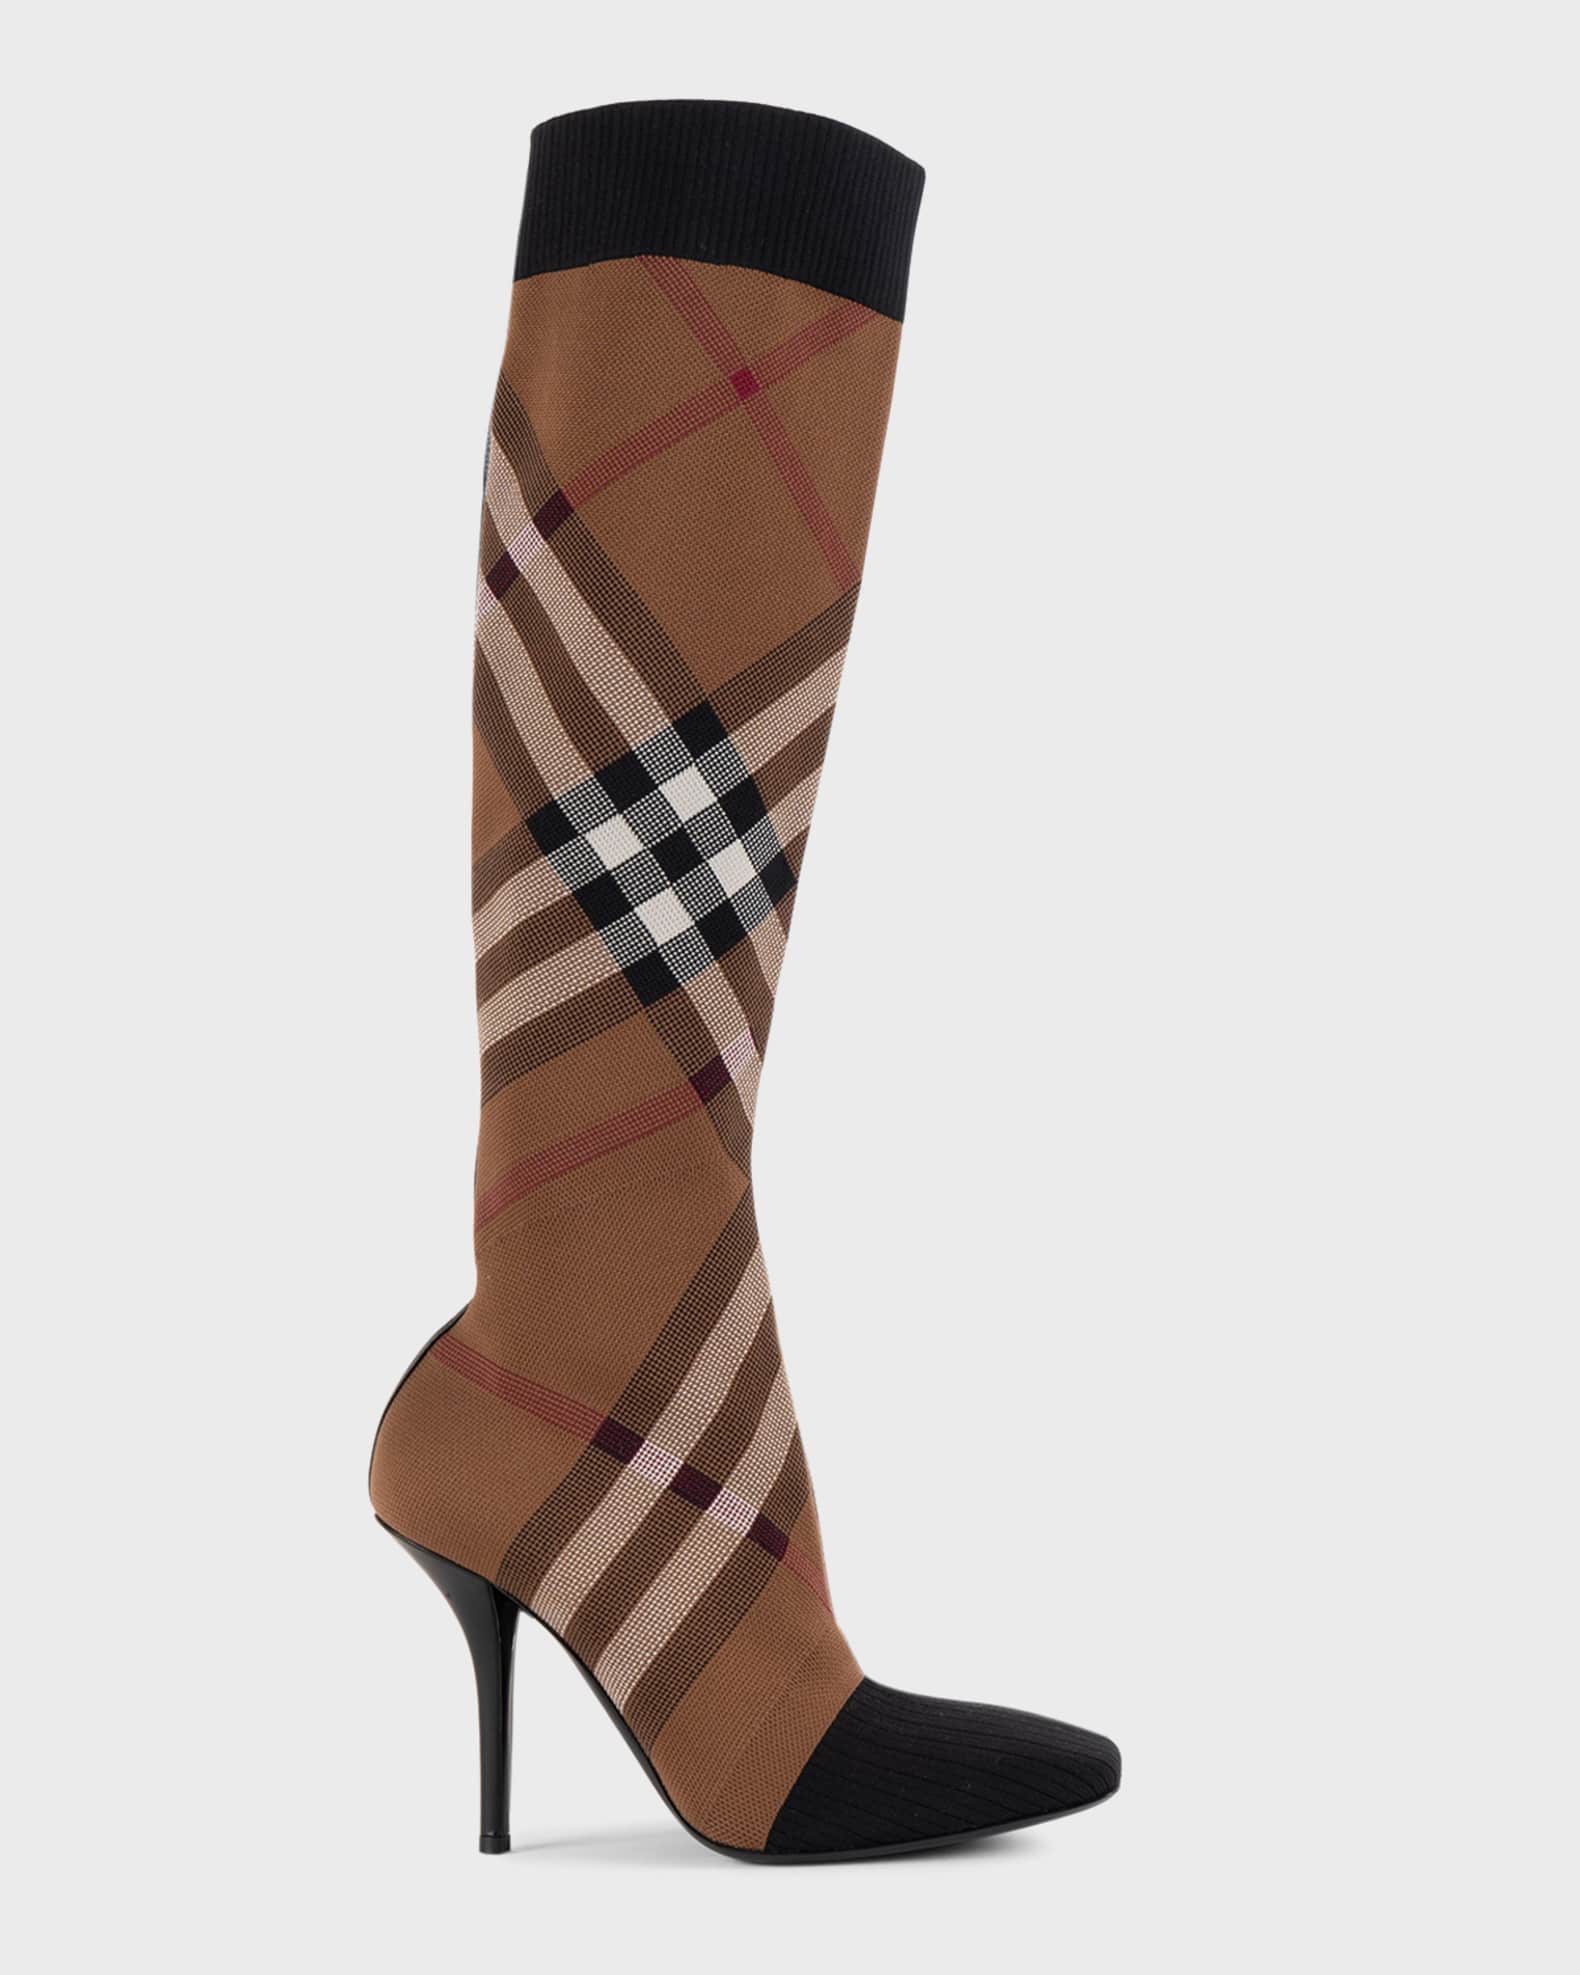 Iconic Checkered Vaughan Boot: Burberry Vaughan Check Boot